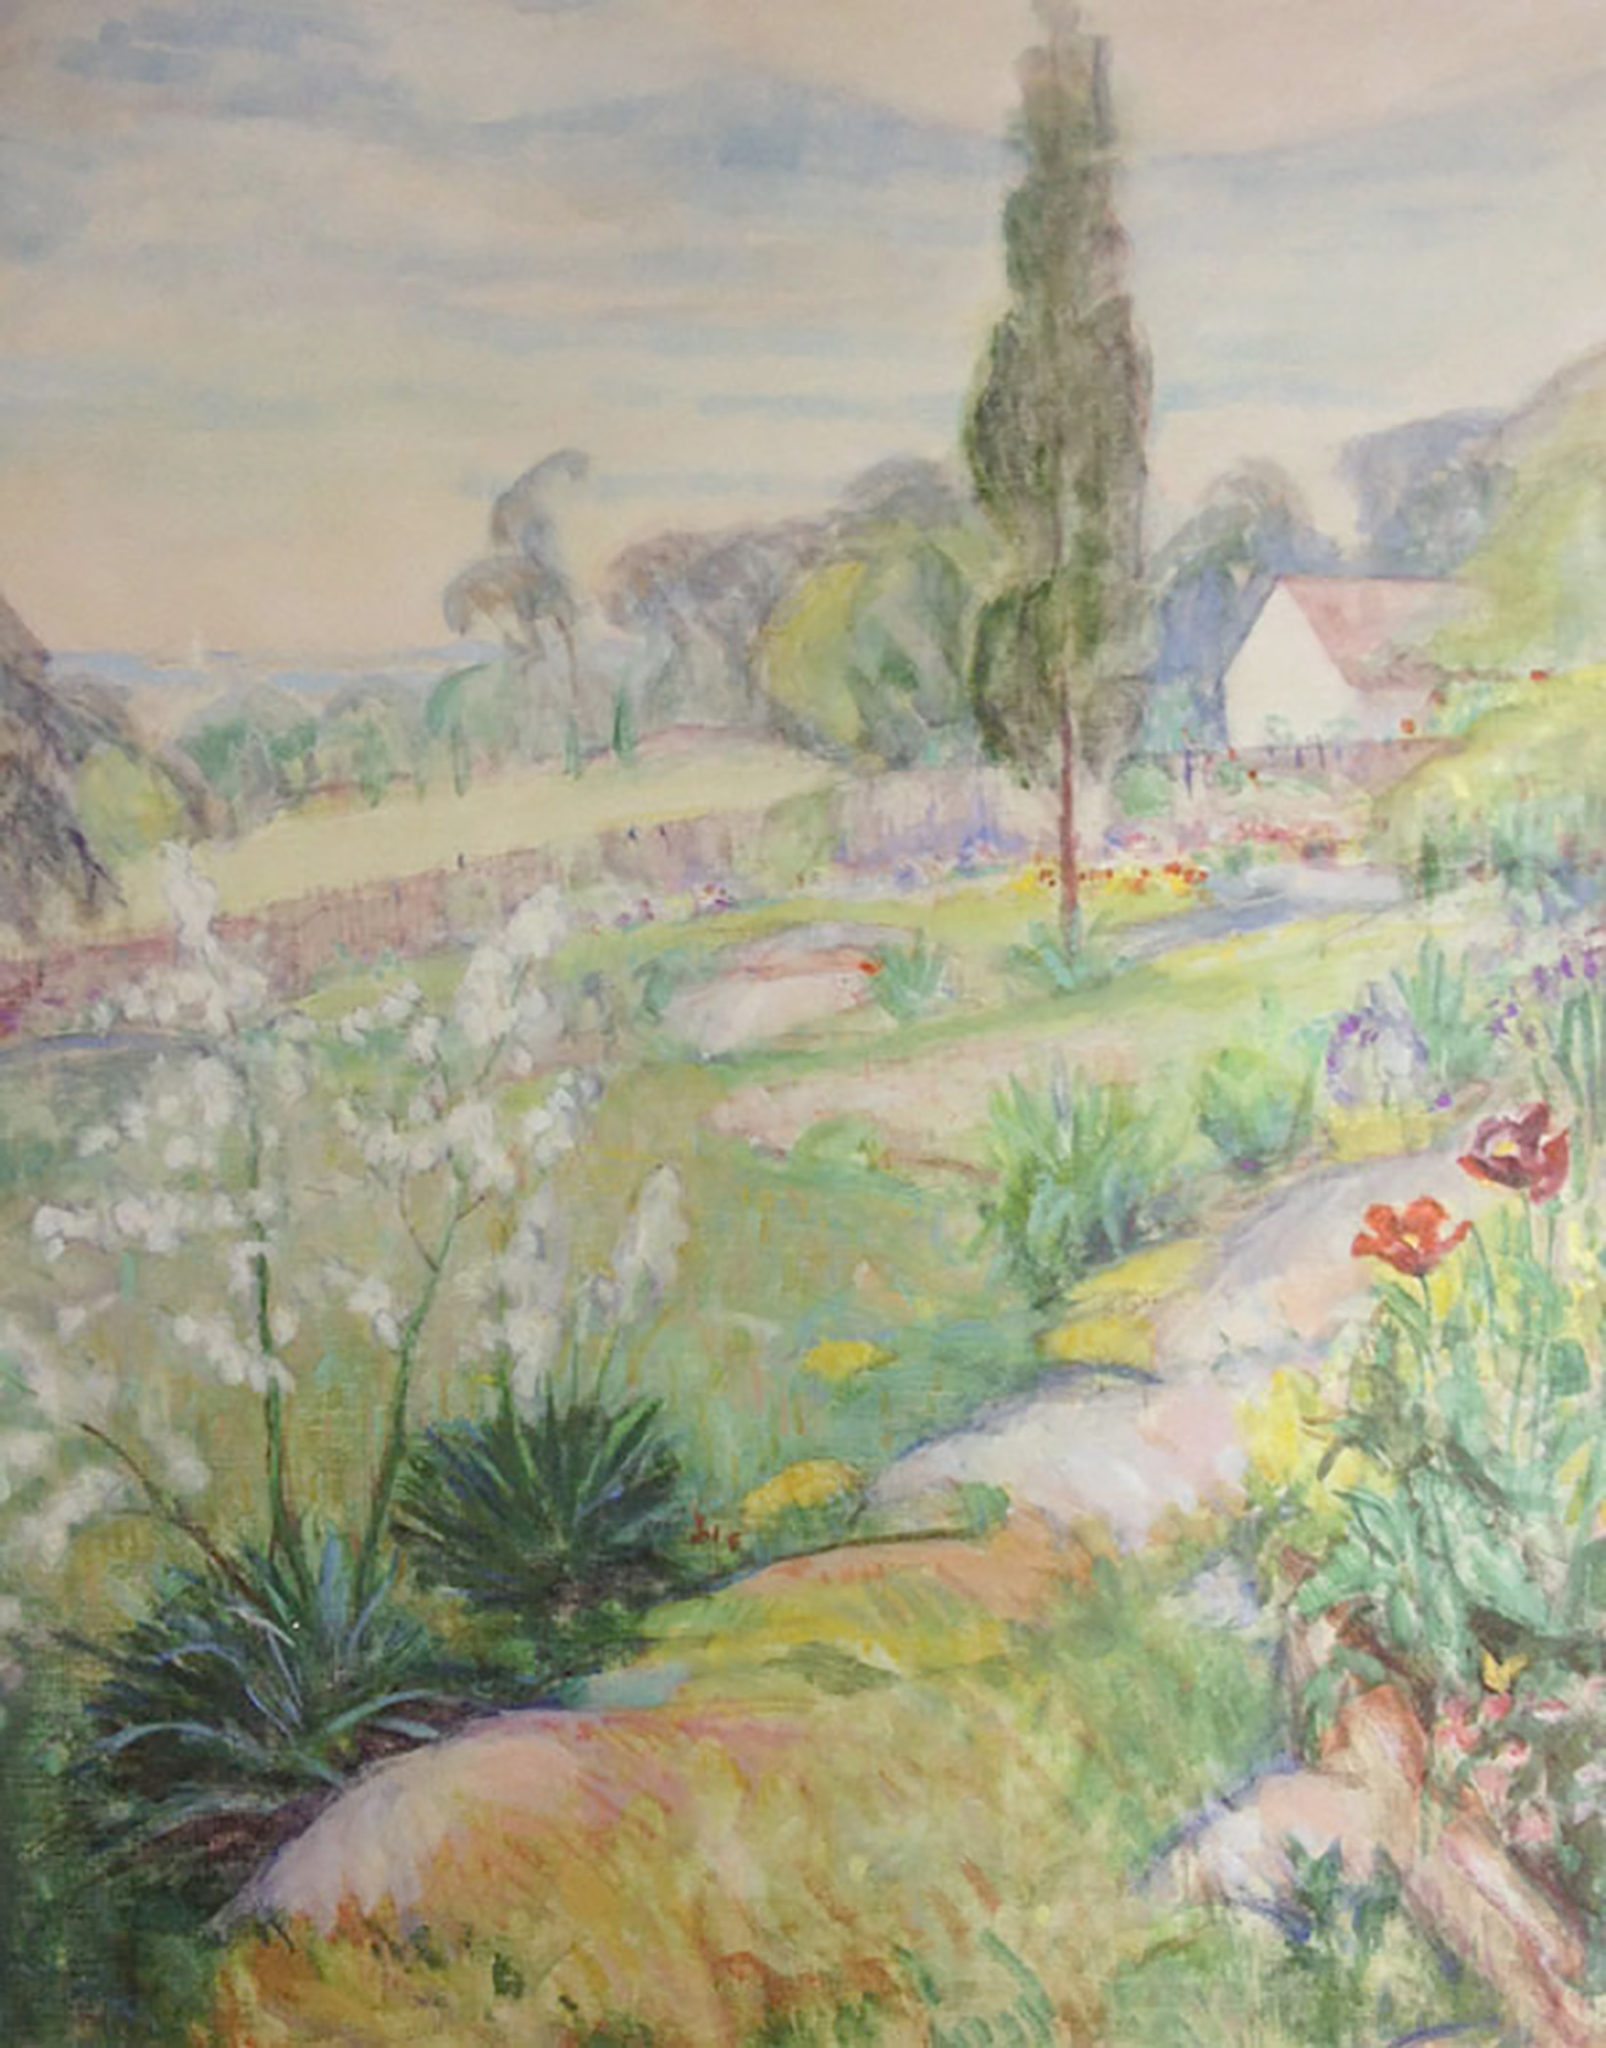 Exhibition Note: The Celebrated Gardens of Lyme Artists